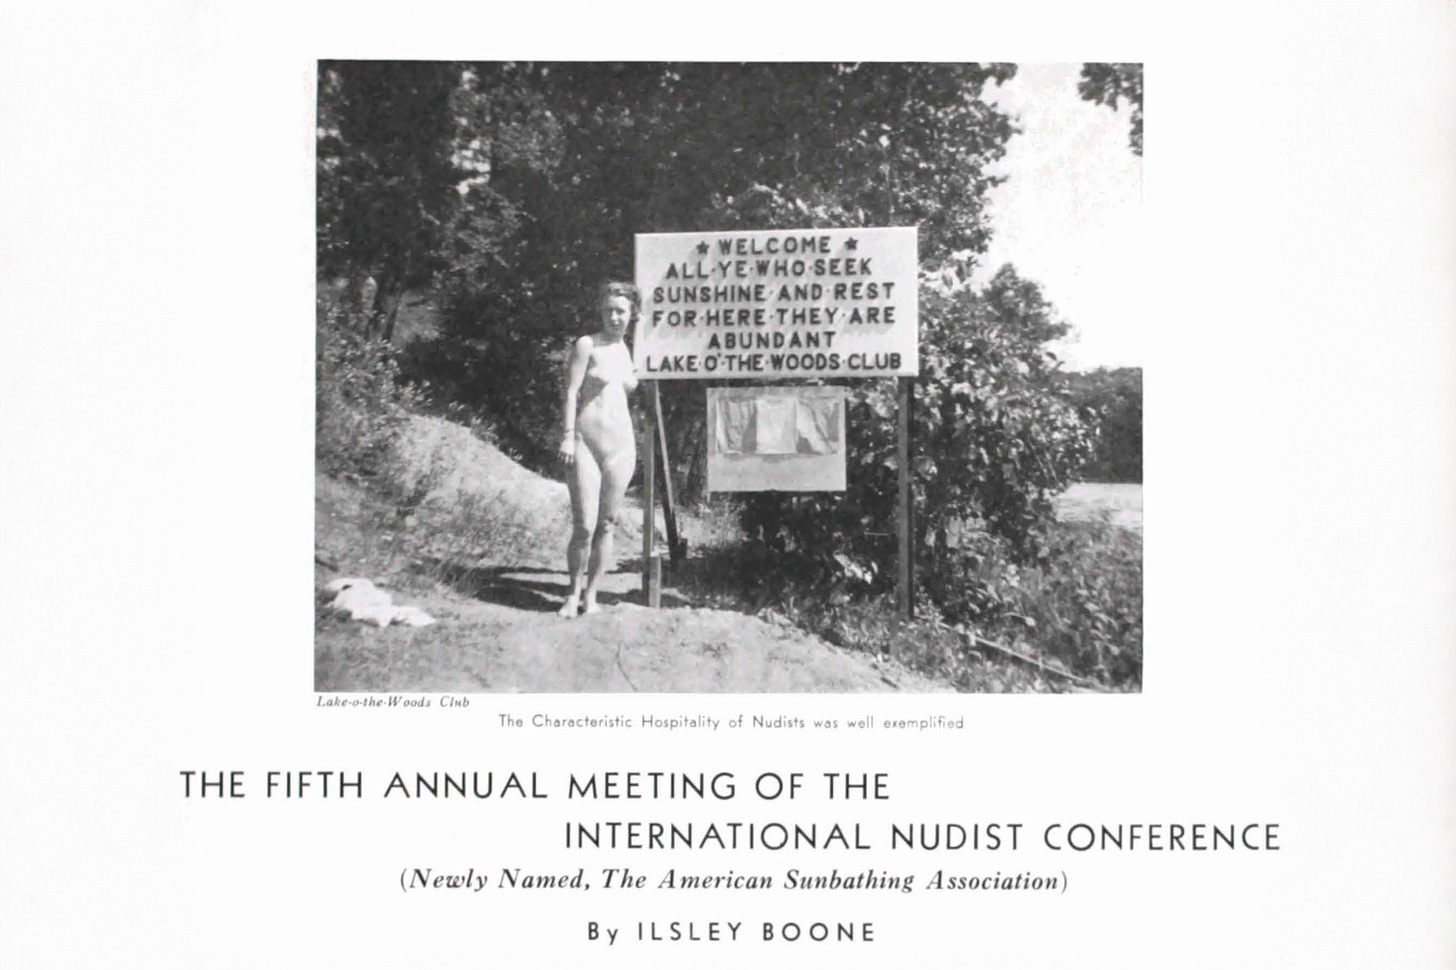 The Fifth Annual Meeting of the International Nudist Conference, The Nudist, November 1936